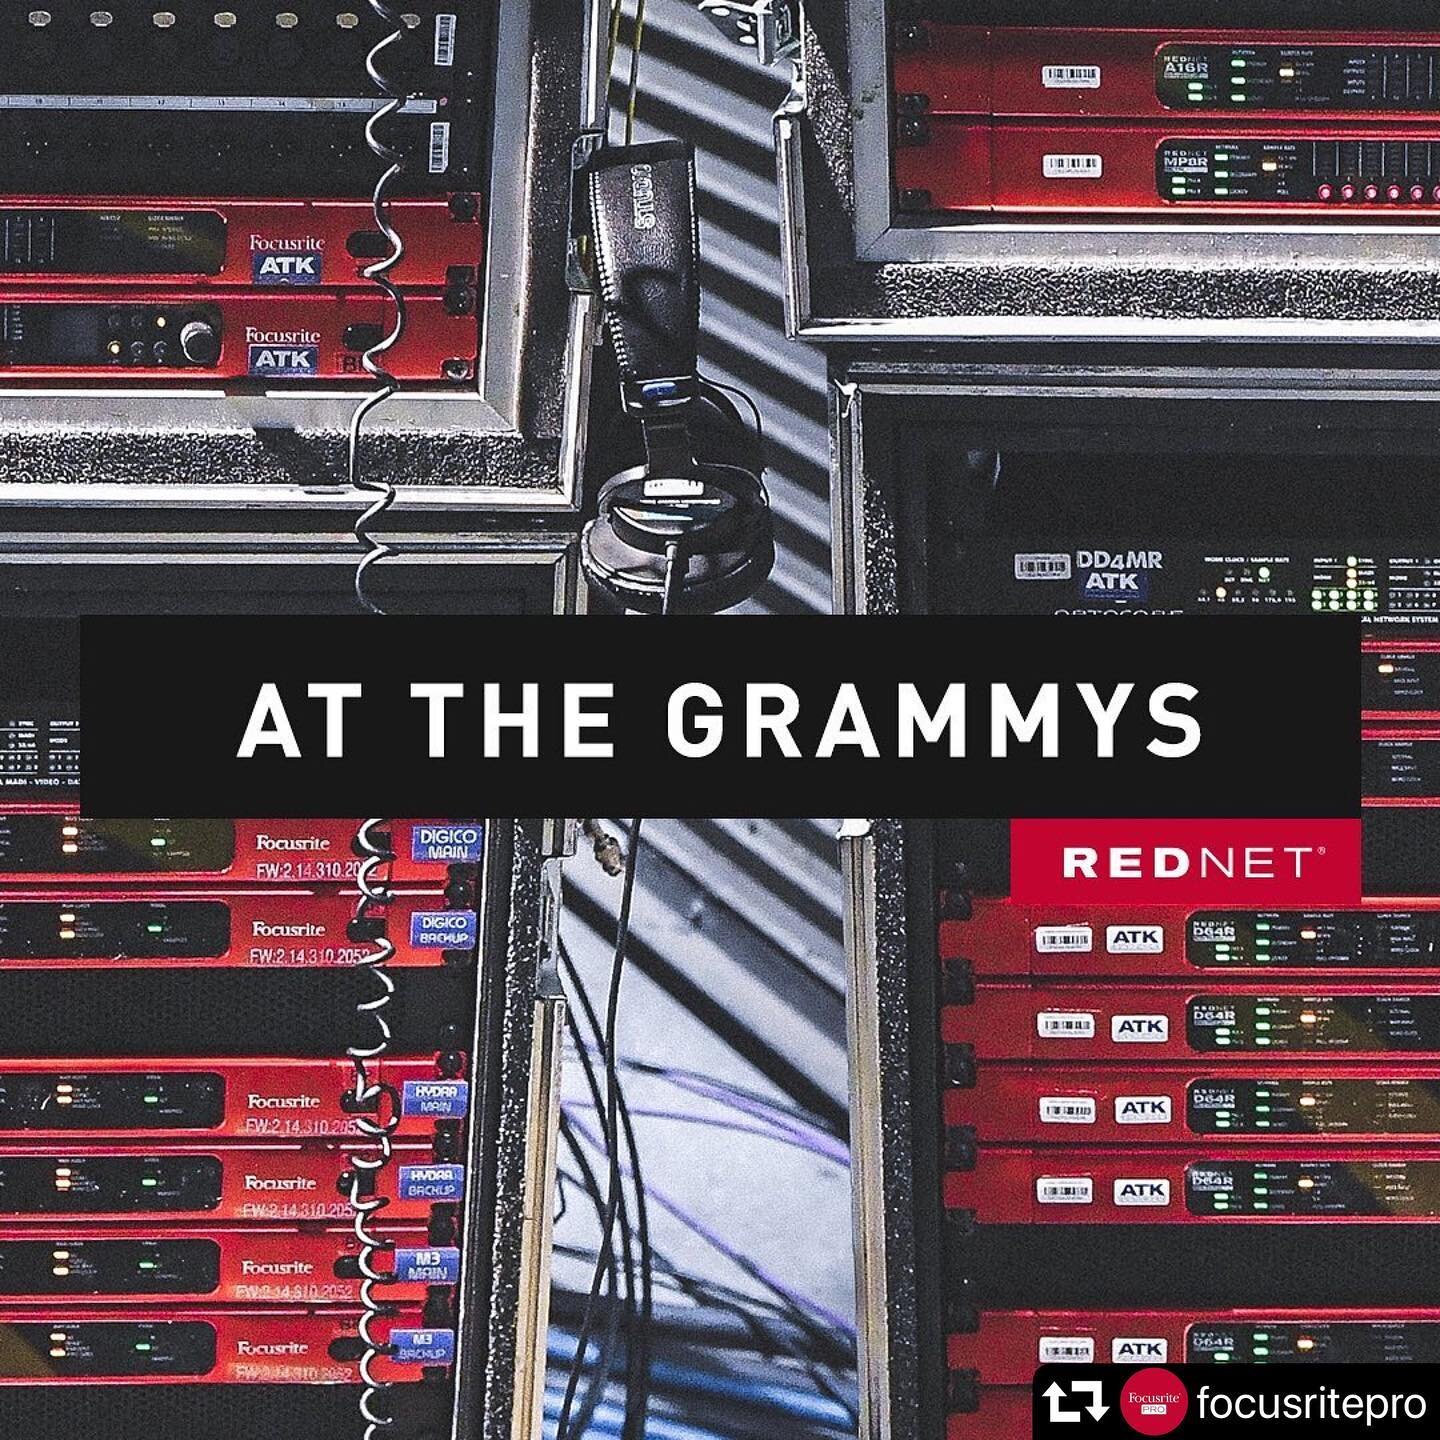 #repost @focusritepro
・・・
Discover how Focusrite RedNet devices were used to deliver the ideal Audio-Over-IP solution for this year's GRAMMY&reg; Awards show. 
Read the blogpost on our website for more info!
#FocusritePro #AoIP #ProAudio #grammyaward